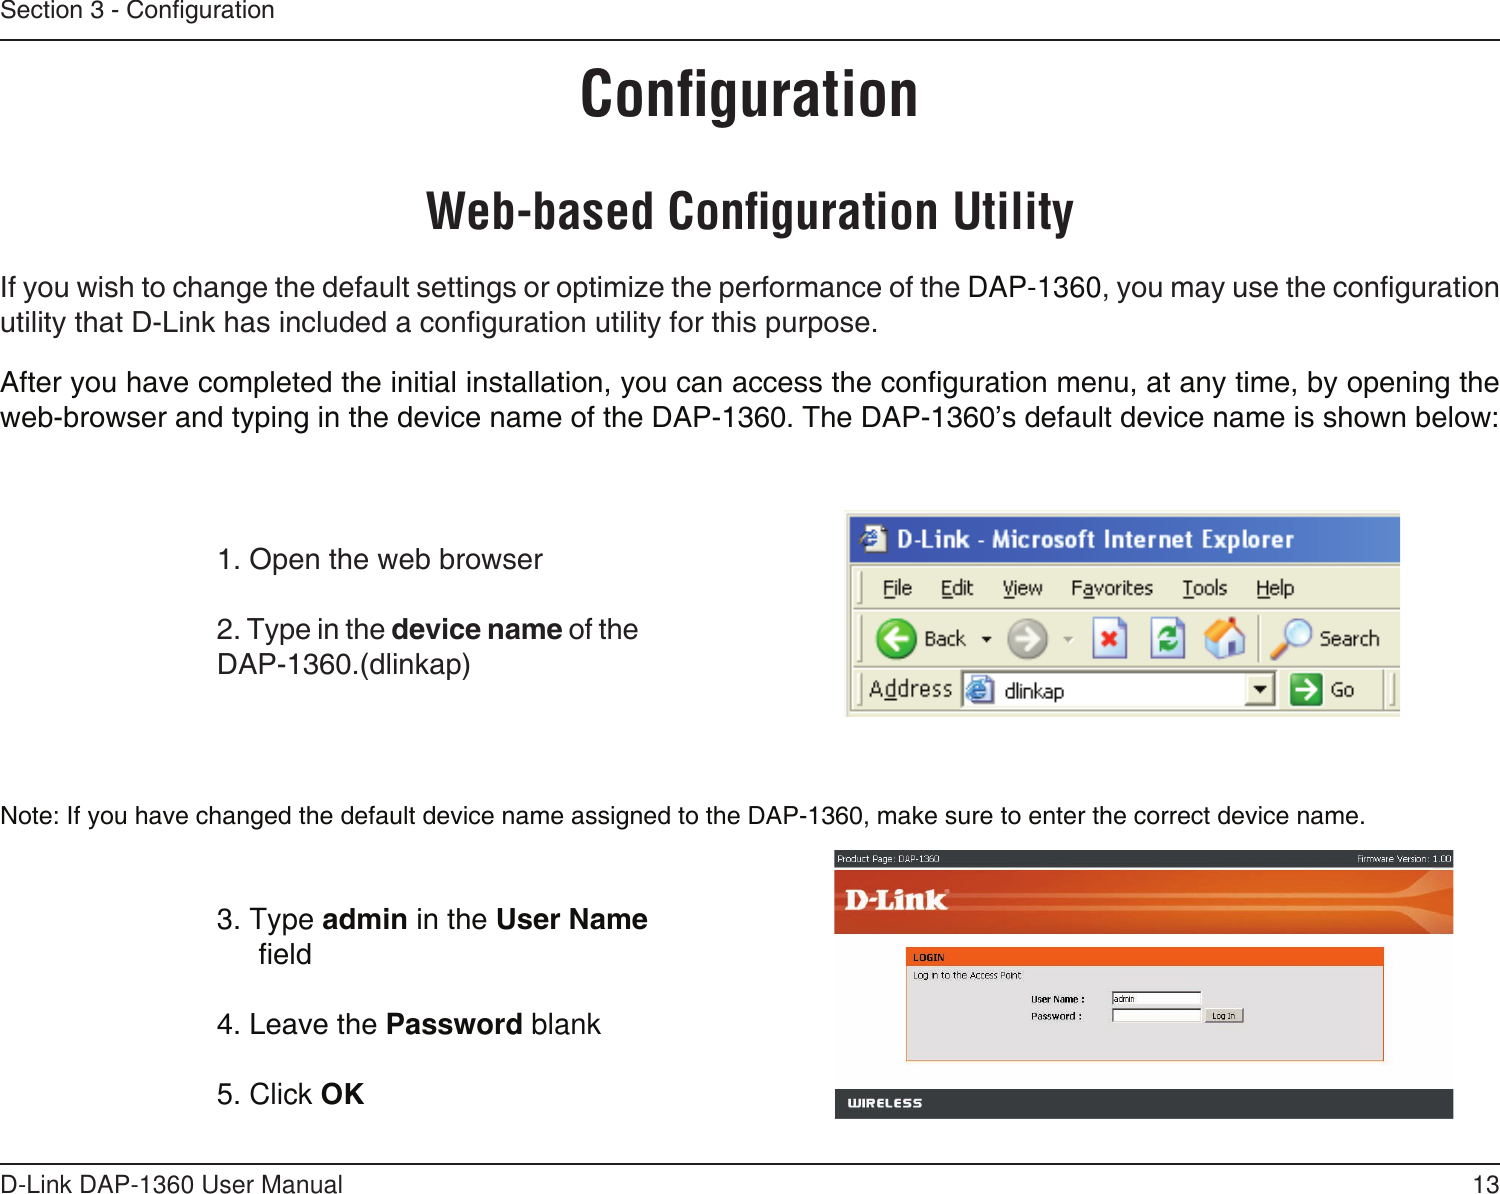 13D-Link DAP-1360 User ManualSection 3 - CongurationConﬁgurationWeb-based Conﬁguration Utility1. Open the web browser2. Type in the device name of the DAP-1360.(dlinkap)If you wish to change the default settings or optimize the performance of the DAP-1360, you may use the configuration utility that D-Link has included a configuration utility for this purpose.After you have completed the initial installation, you can access the configuration menu, at any time, by opening the web-browser and typing in the device name of the DAP-1360. The DAP-1360’s default device name is shown below:Note: If you have changed the default device name assigned to the DAP-1360, make sure to enter the correct device name. 3. Type admin in the User Name eld 4. Leave the Password blank5. Click OK